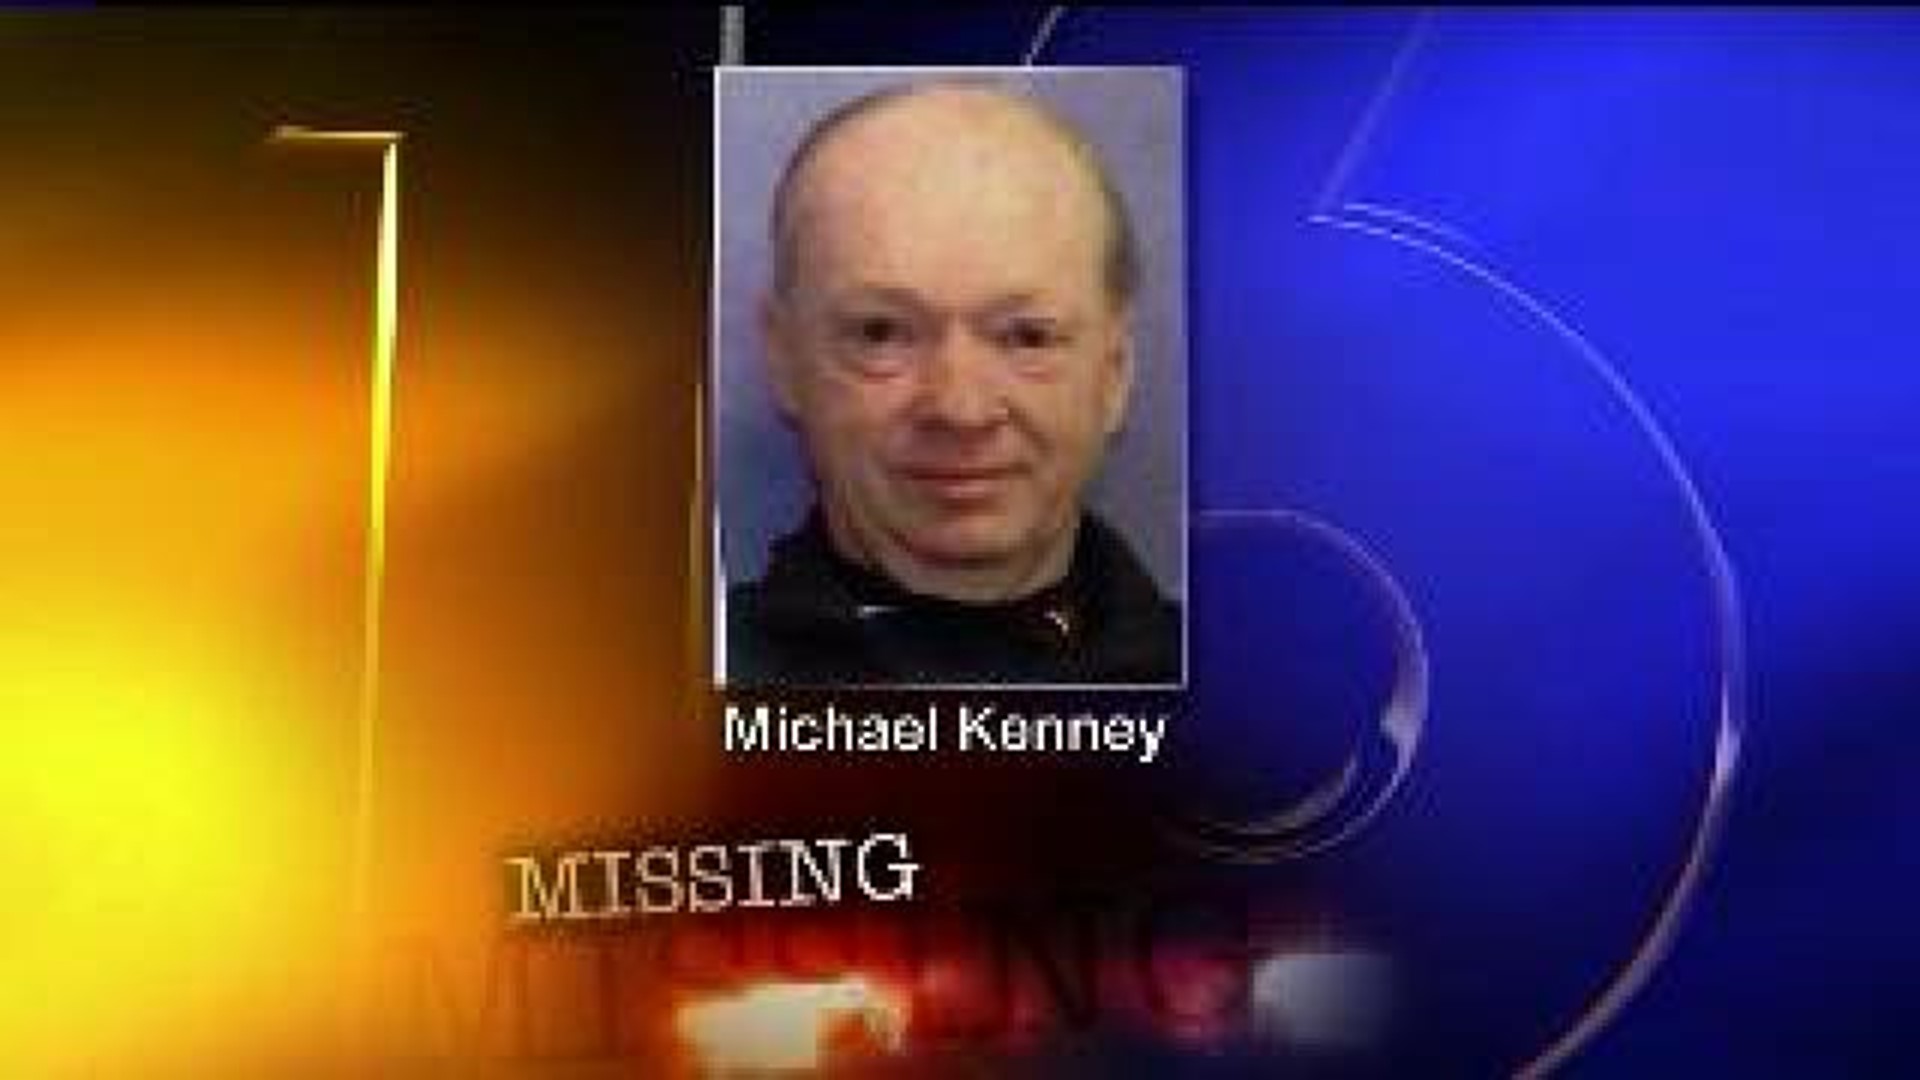 Search For Missing Man Continues